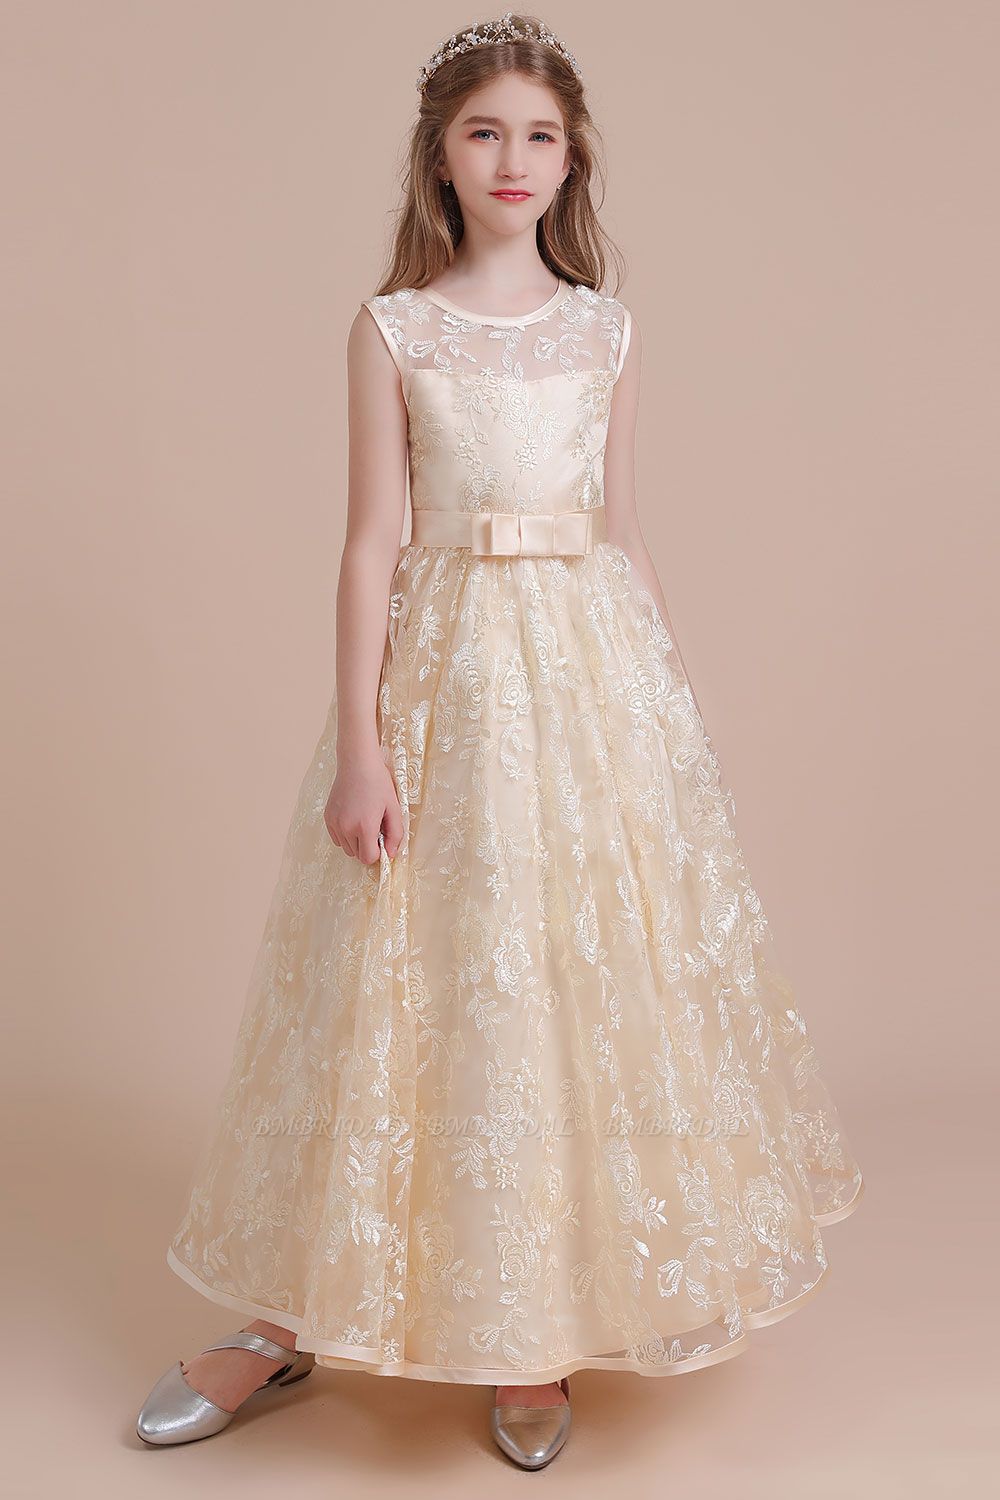 BMbridal A-Line Amazing Lace Tulle Flower Girl Dress Online